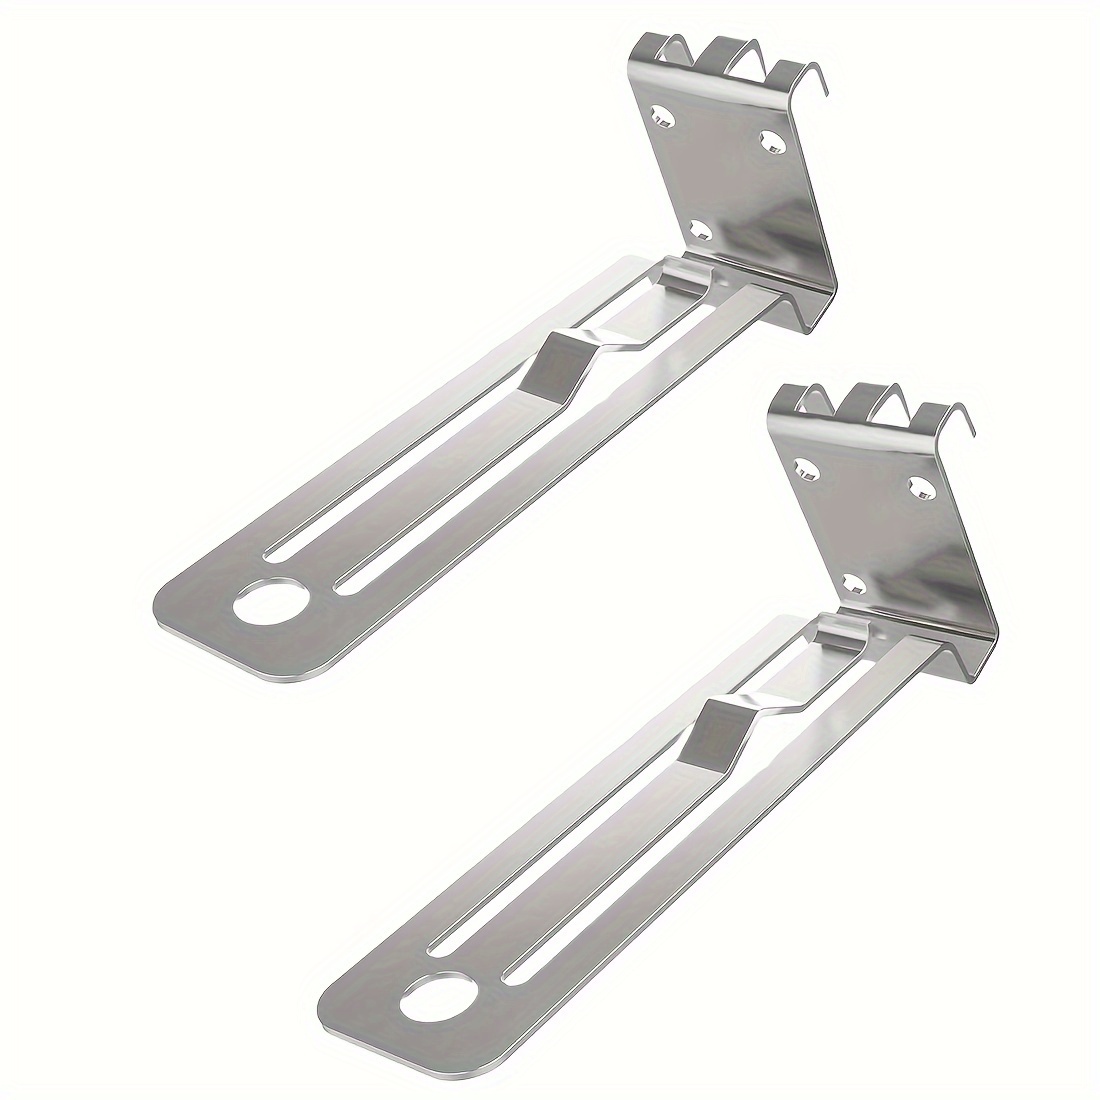 New Gypsum Mounting Board Ceiling Plate Plaster Board Fixing Tool 2pcs%